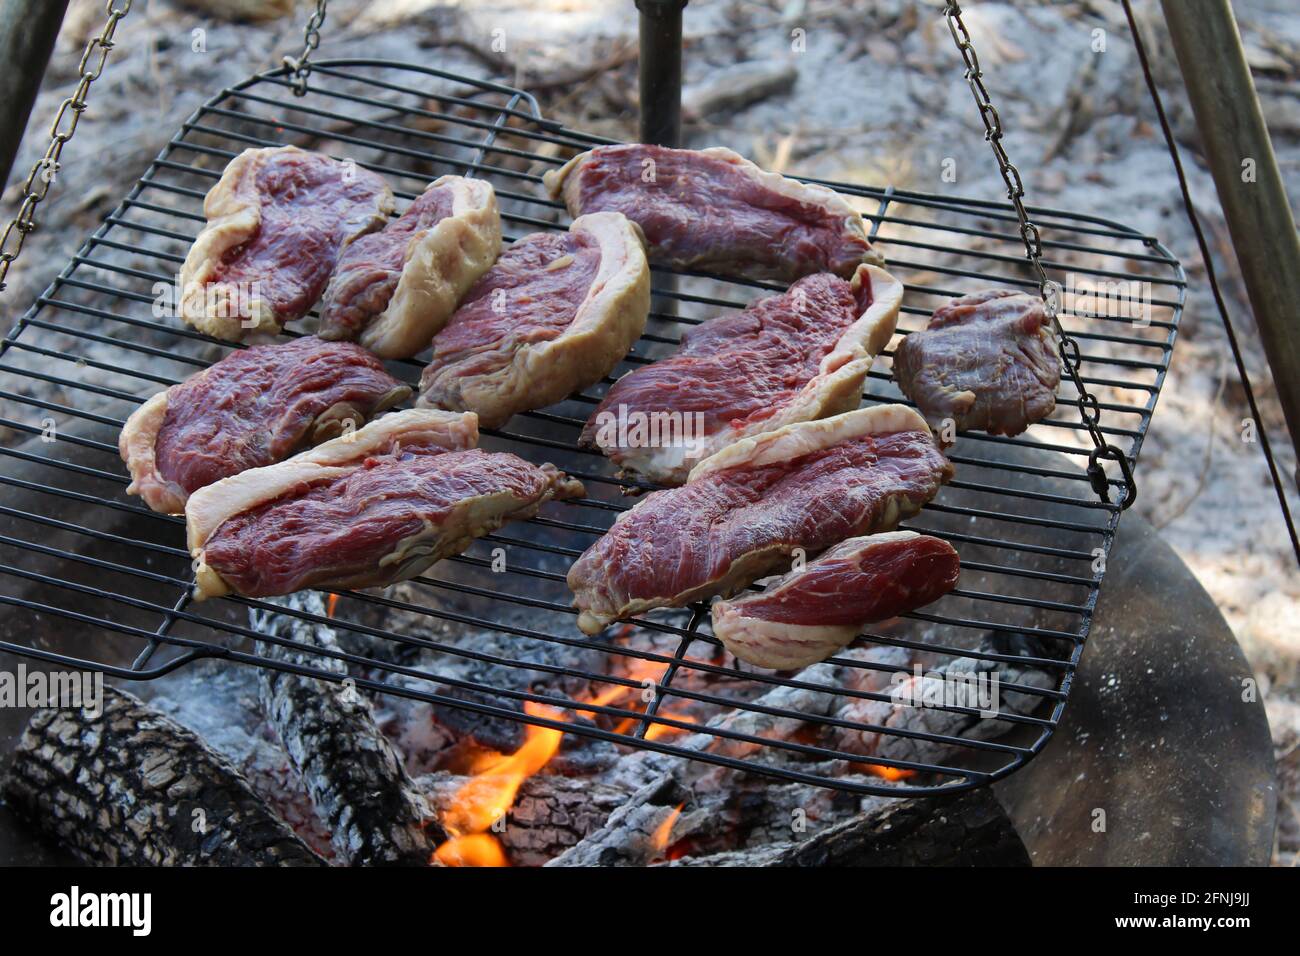 Pieces of raw meat, steaks, cooking on a grill over a wood fire at a camping site. Picanha steak Stock Photo